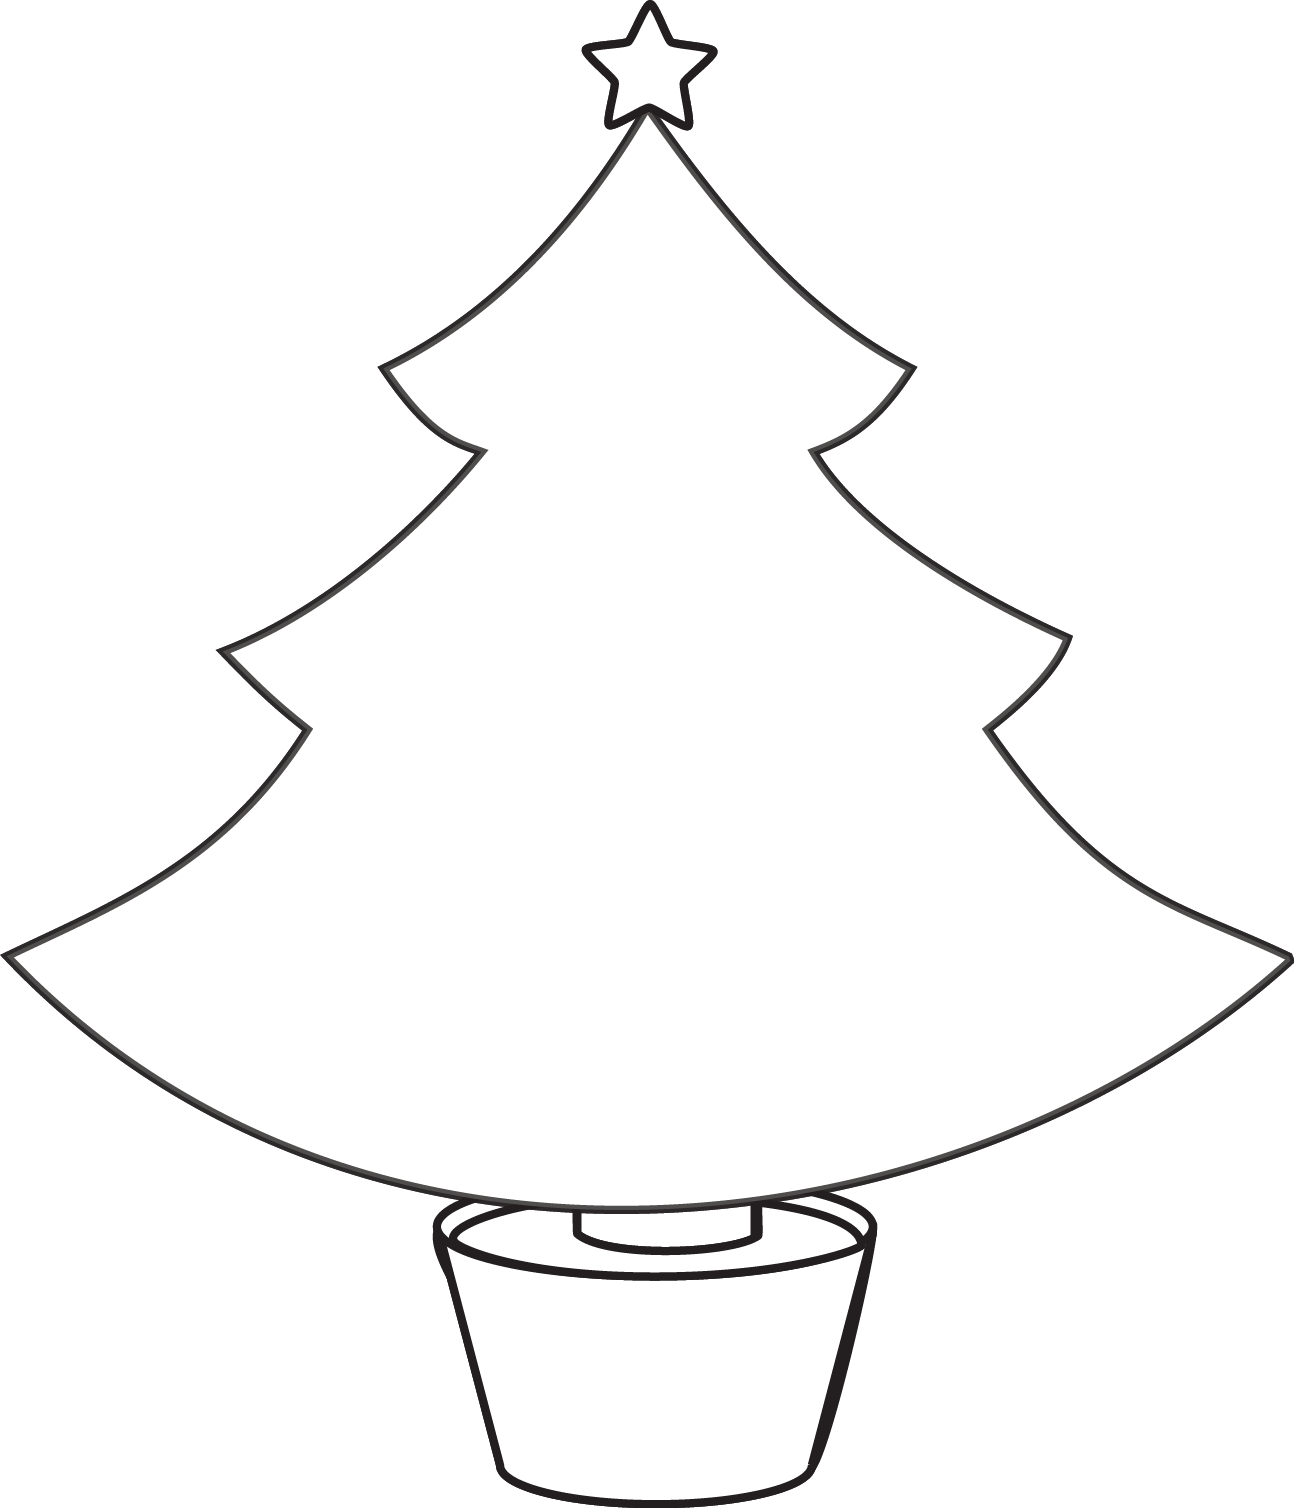 Christmas tree clipart outline black and white